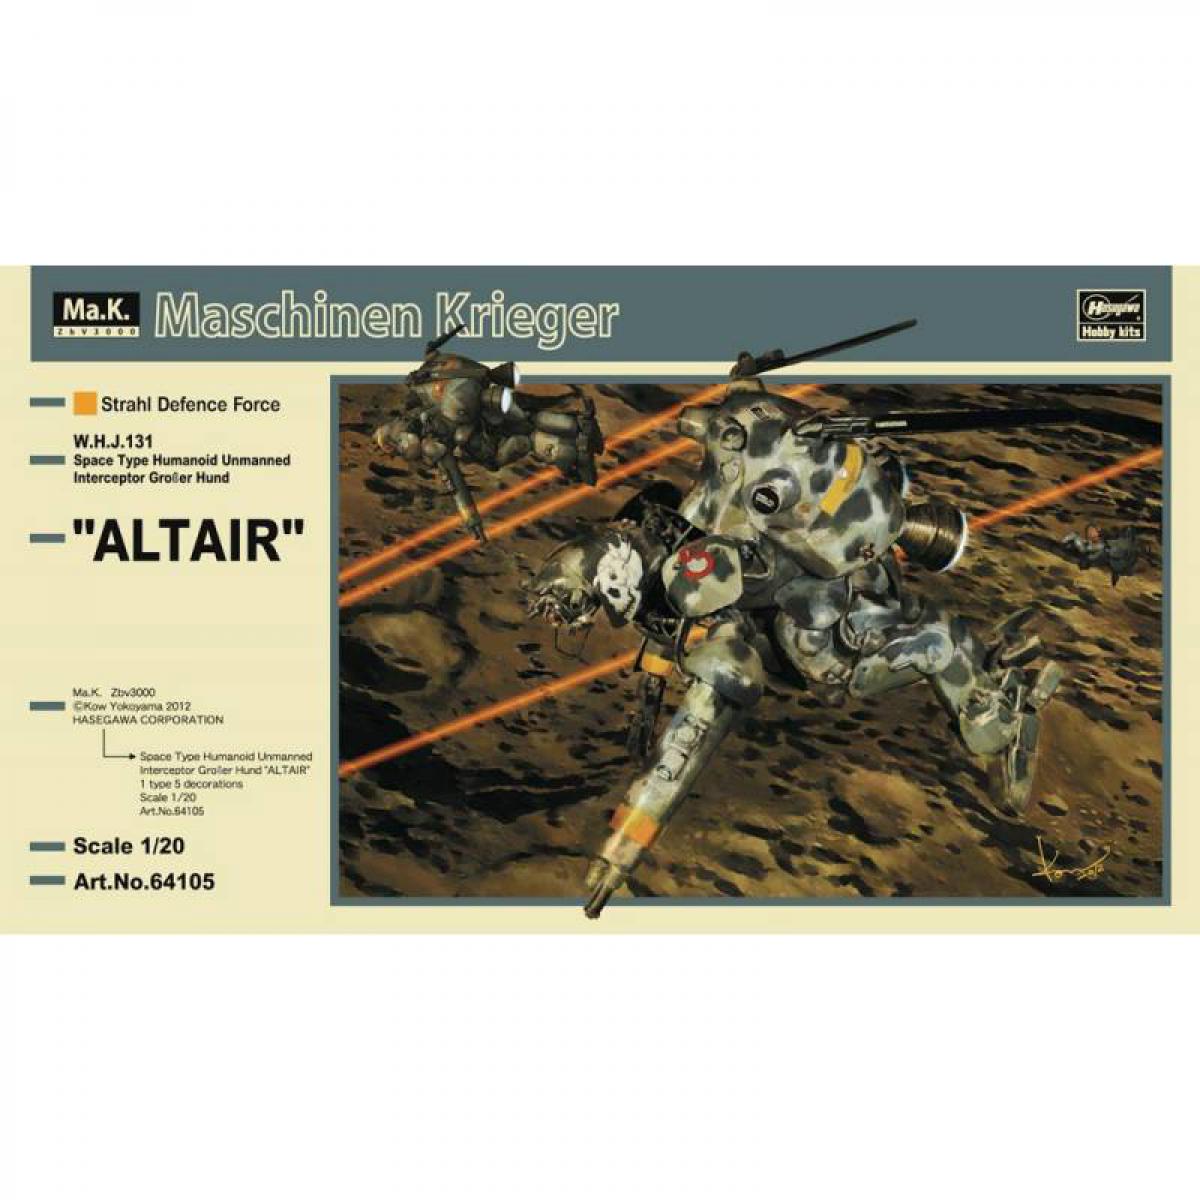 Hasegawa - Maquette Altair W.h.j.131 Space Type Humanoid Unmanned Interceptor Grober Hund - Avions